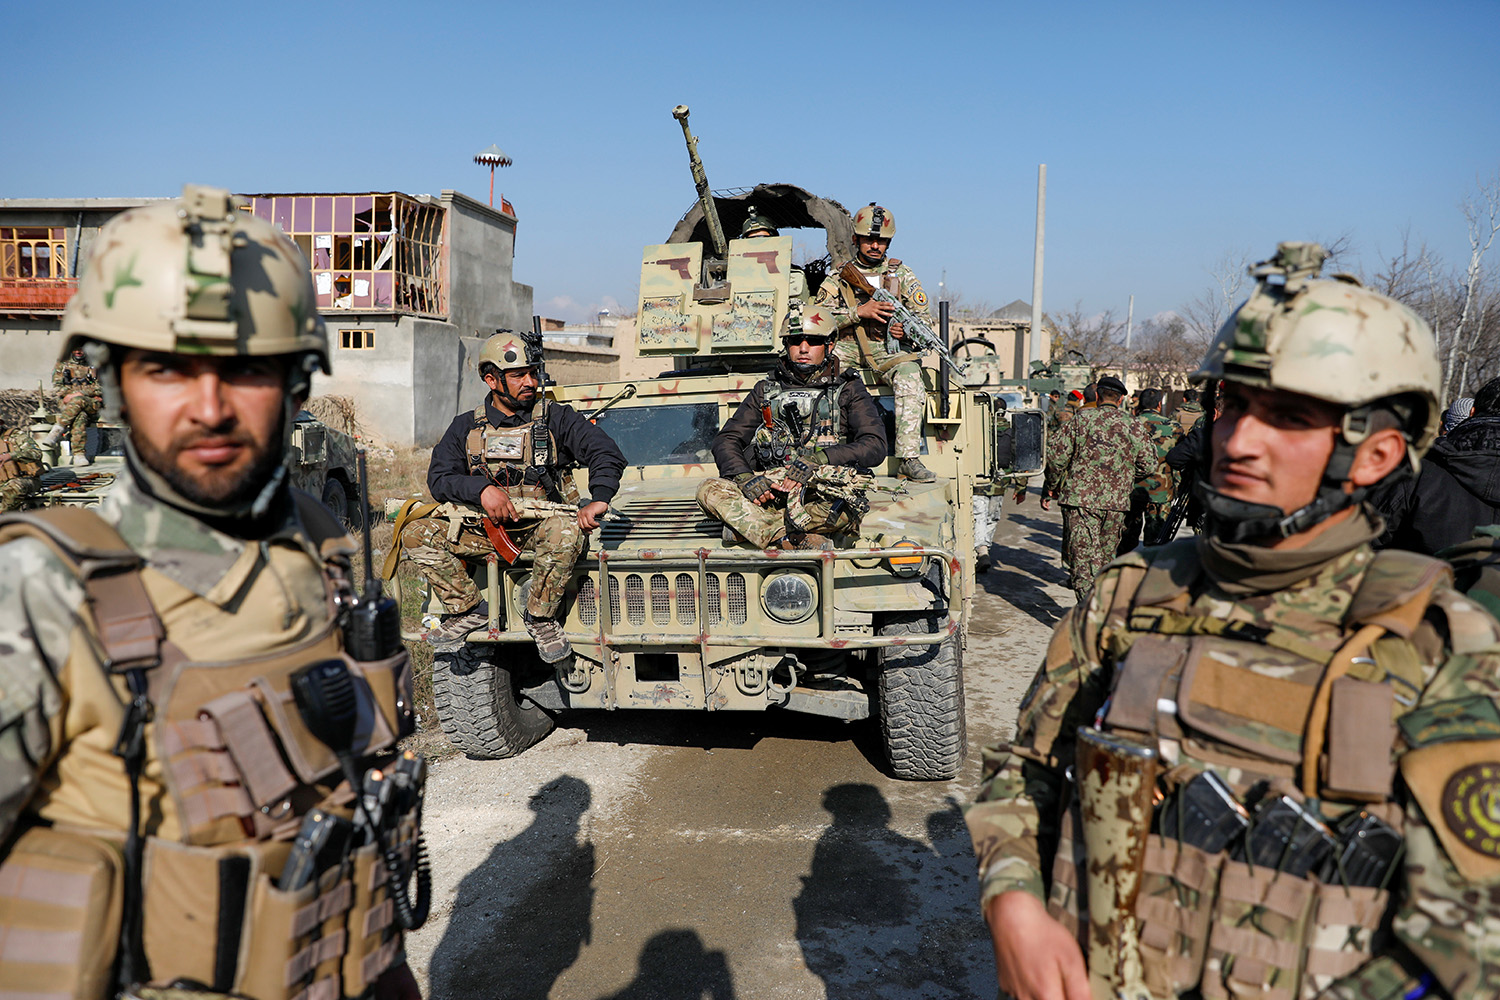 Security forces will not be accepted in Afghanistan, says Security Council